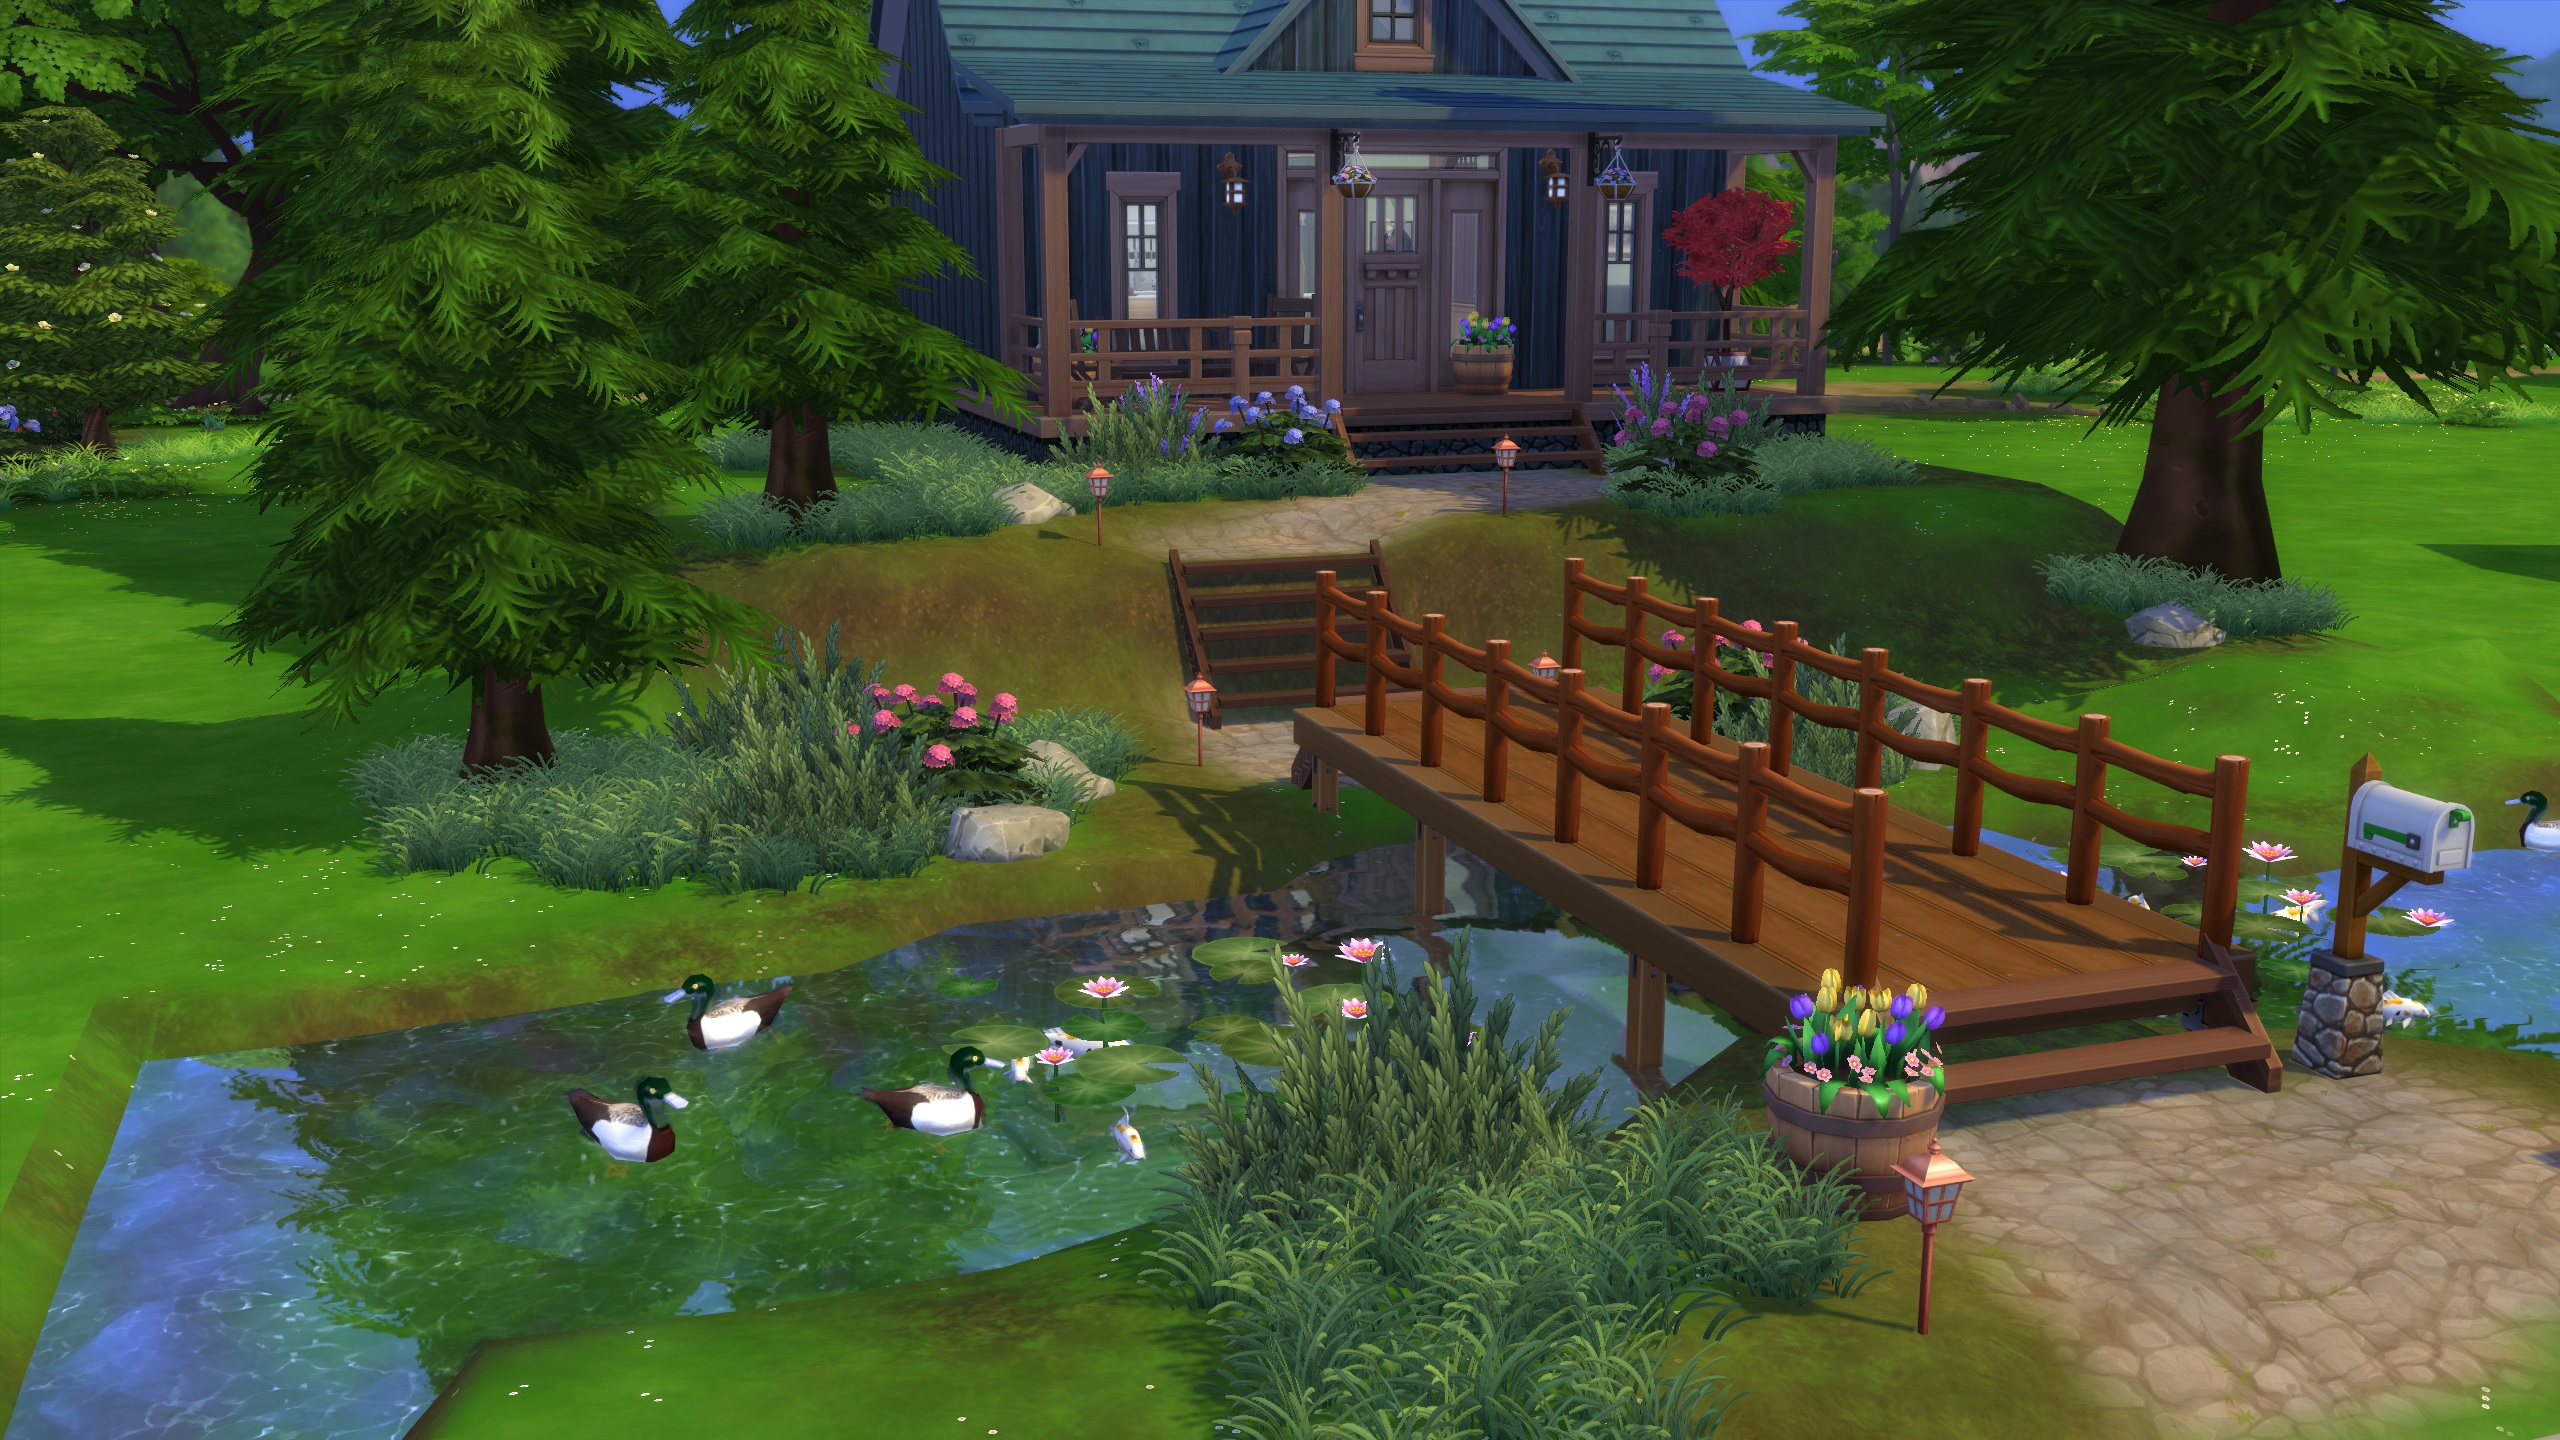 The Sims 4 build tips - A bridge over a small creek leading to a small house on a hill behind trees and grassy foliage.